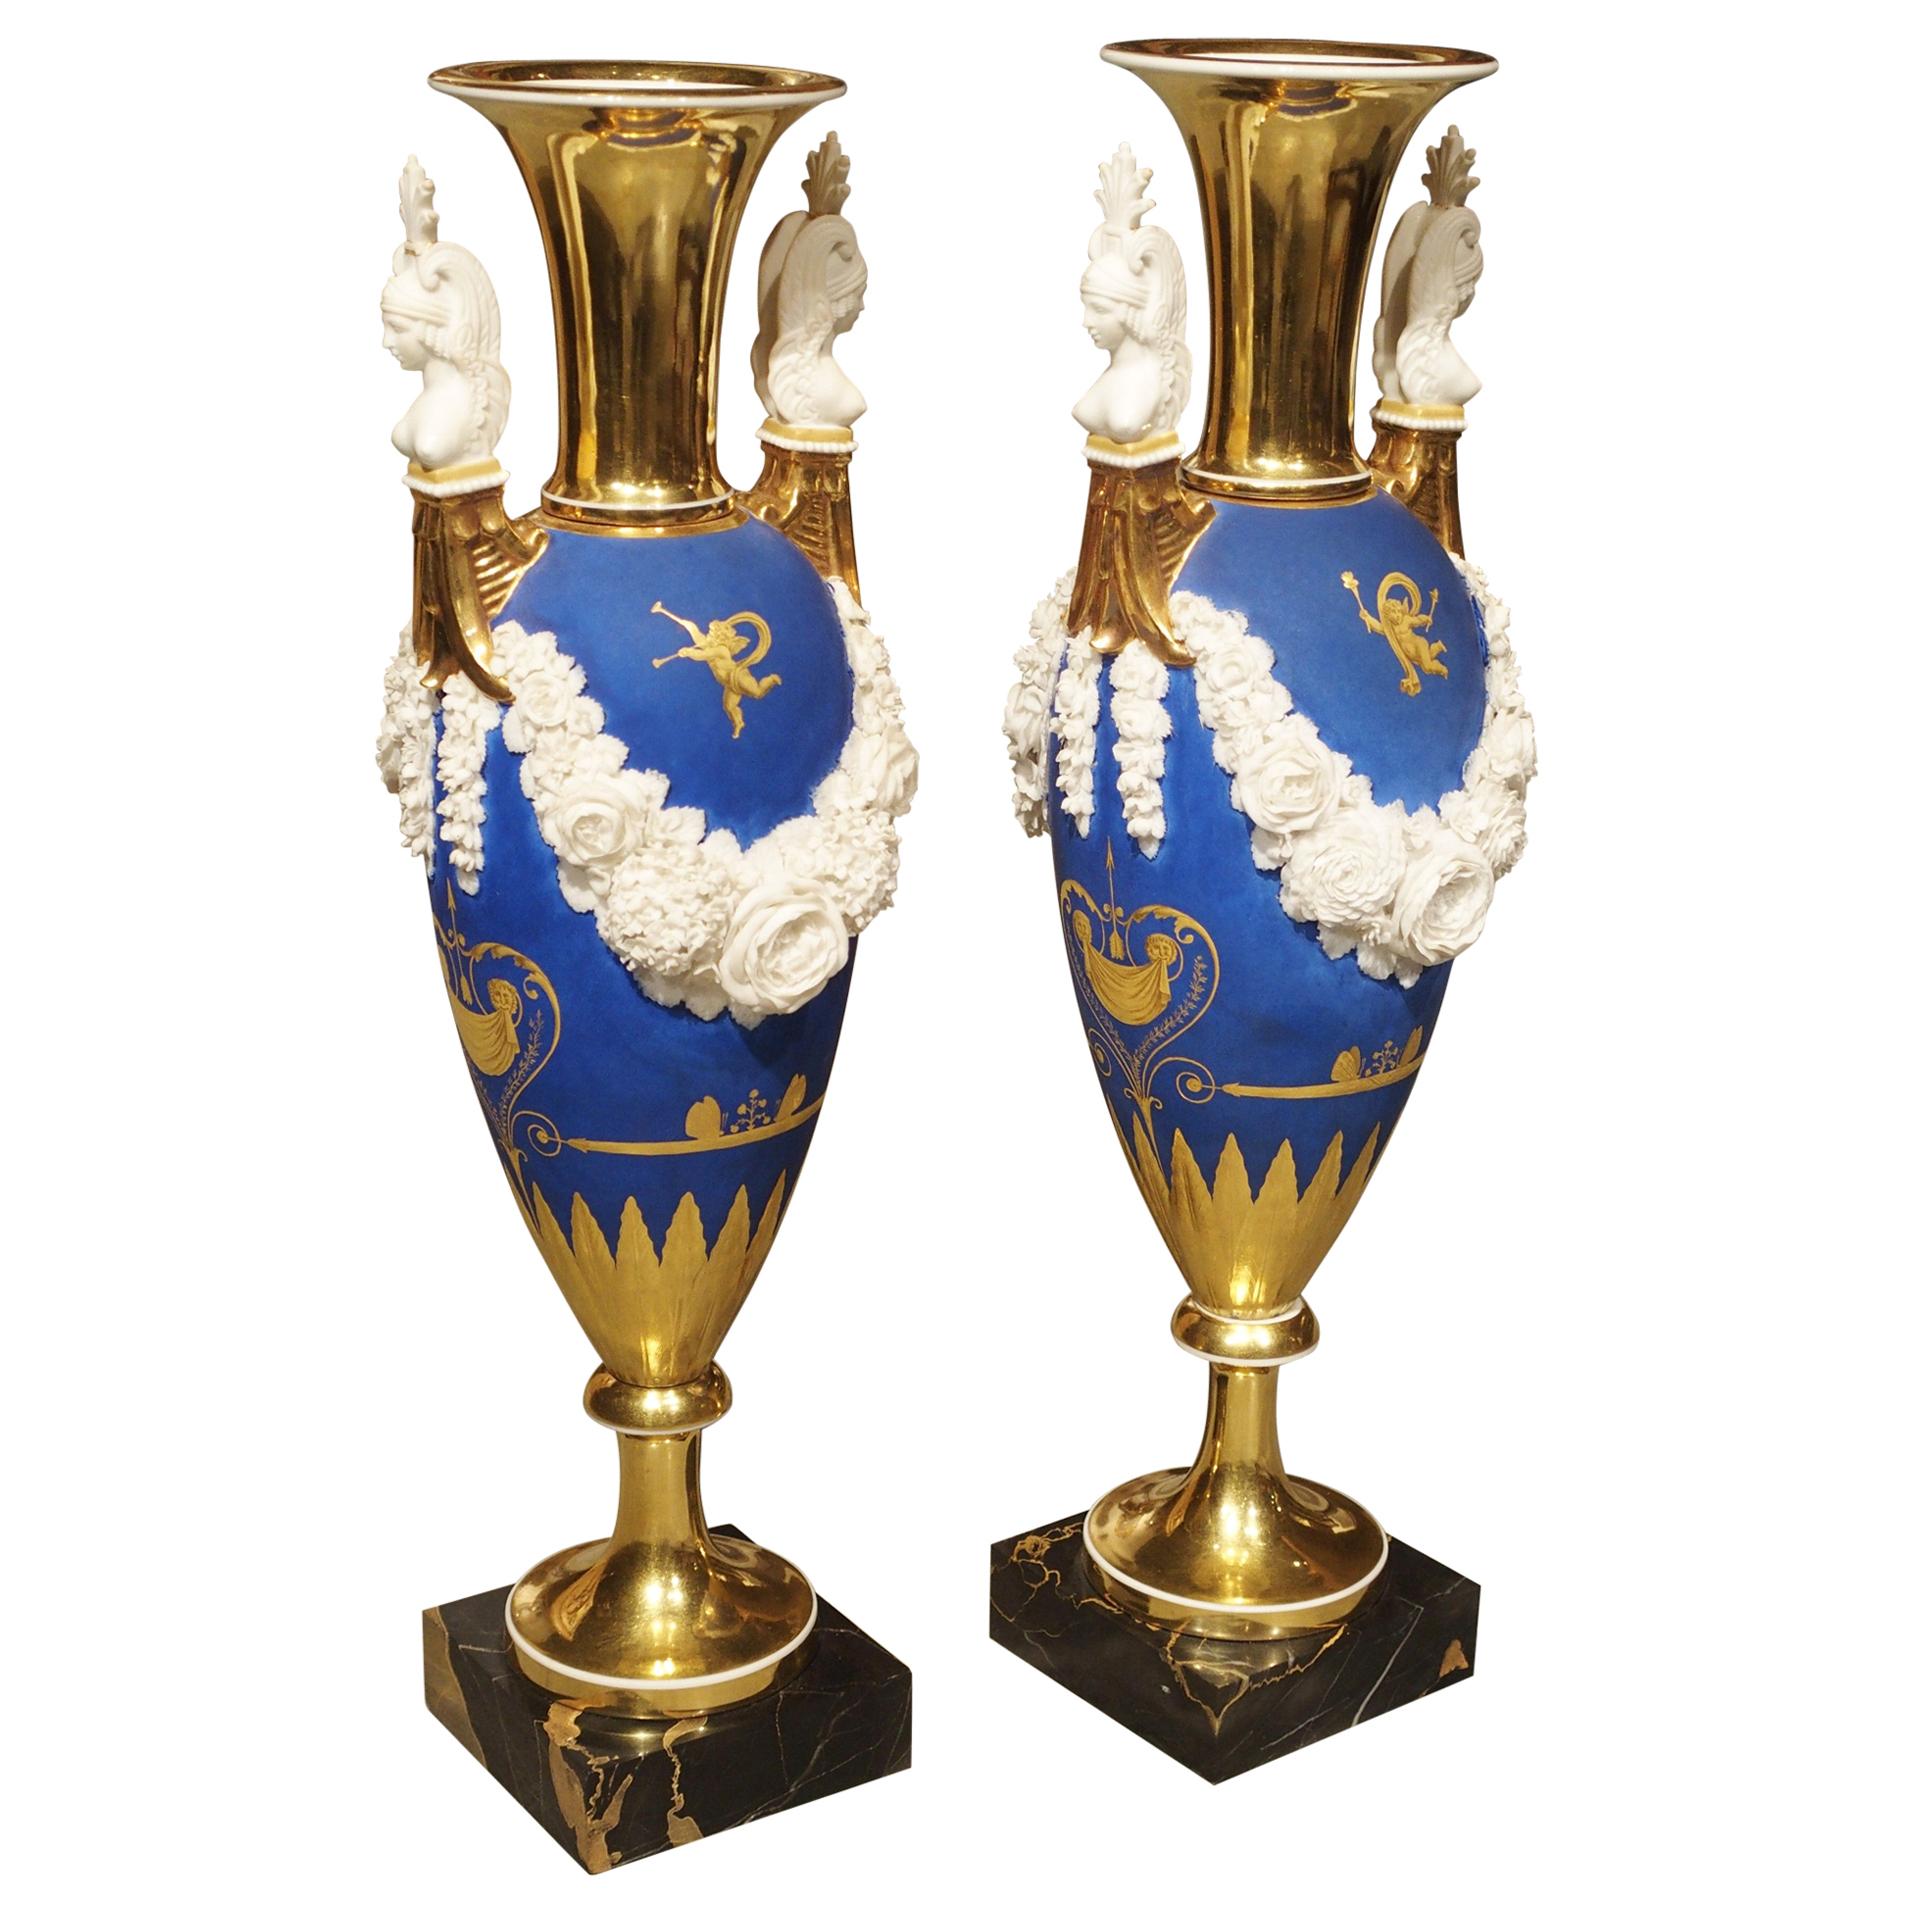 Pair of Neoclassical Paris Porcelain Vases in Royal French Blue, Early 1800s